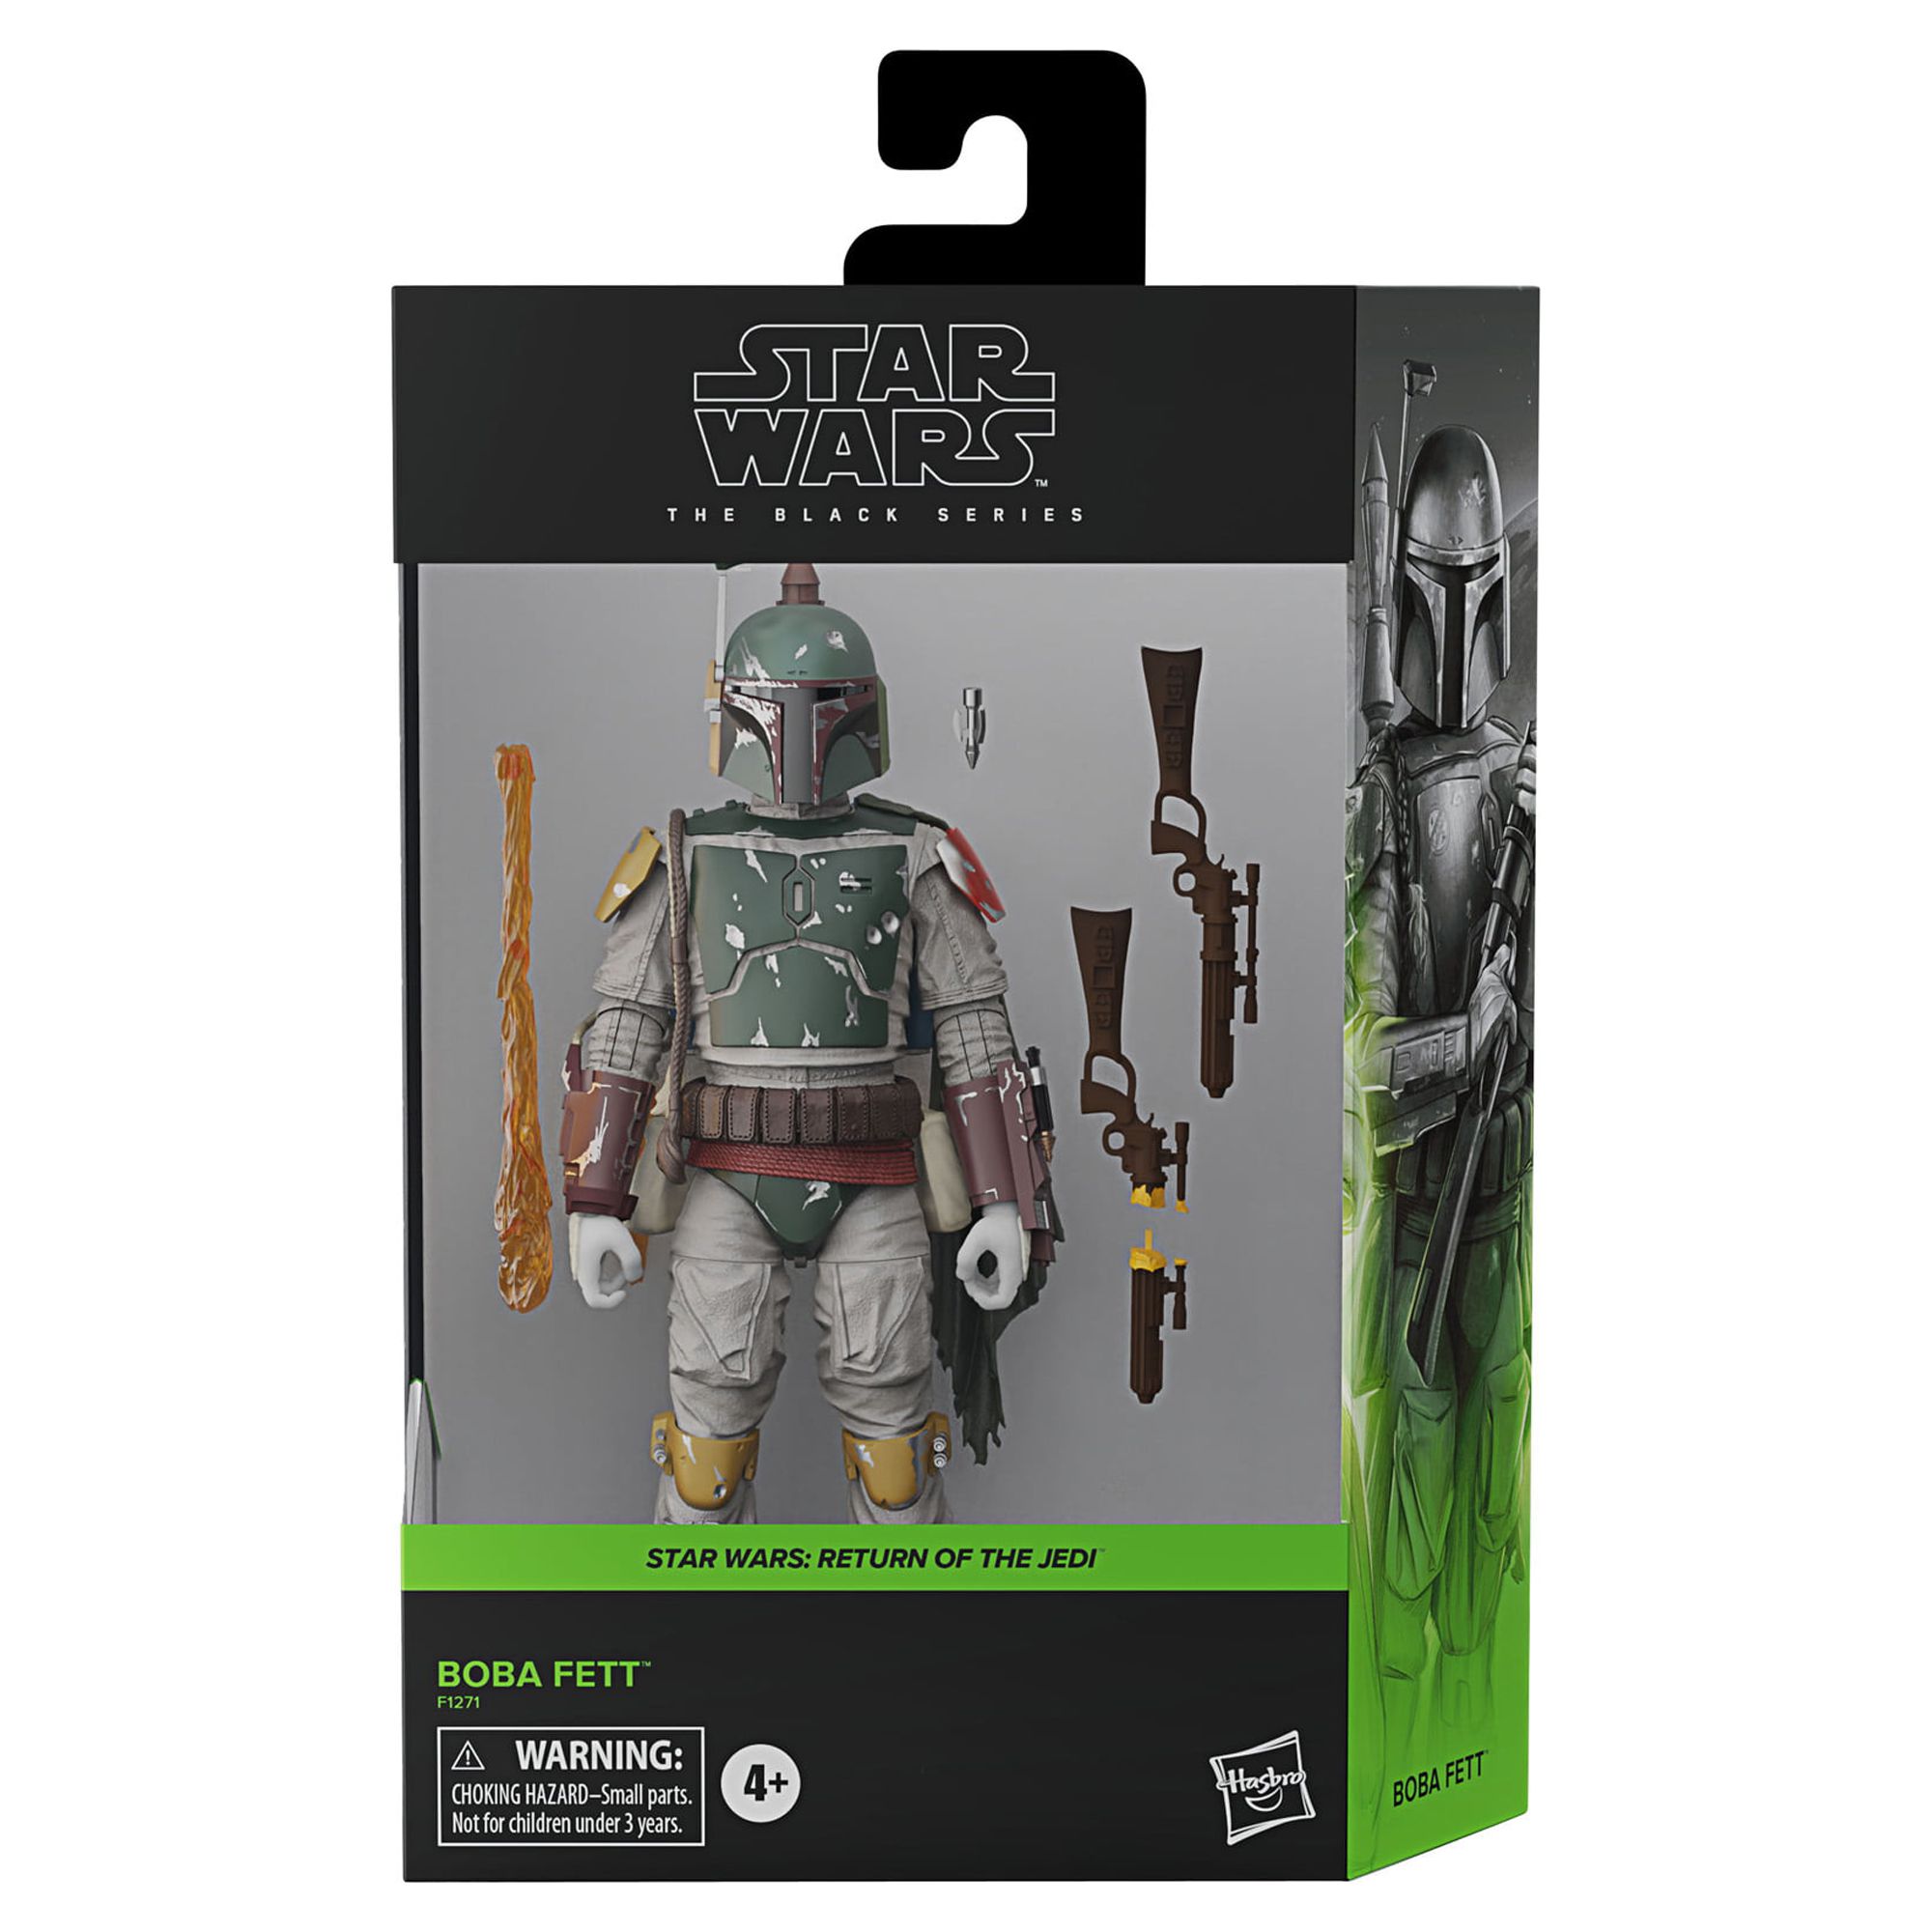 Star Wars Return of the Jedi: The Black Series Boba Fett Kids Toy Action Figure for Boys and Girls (3”) - image 2 of 11